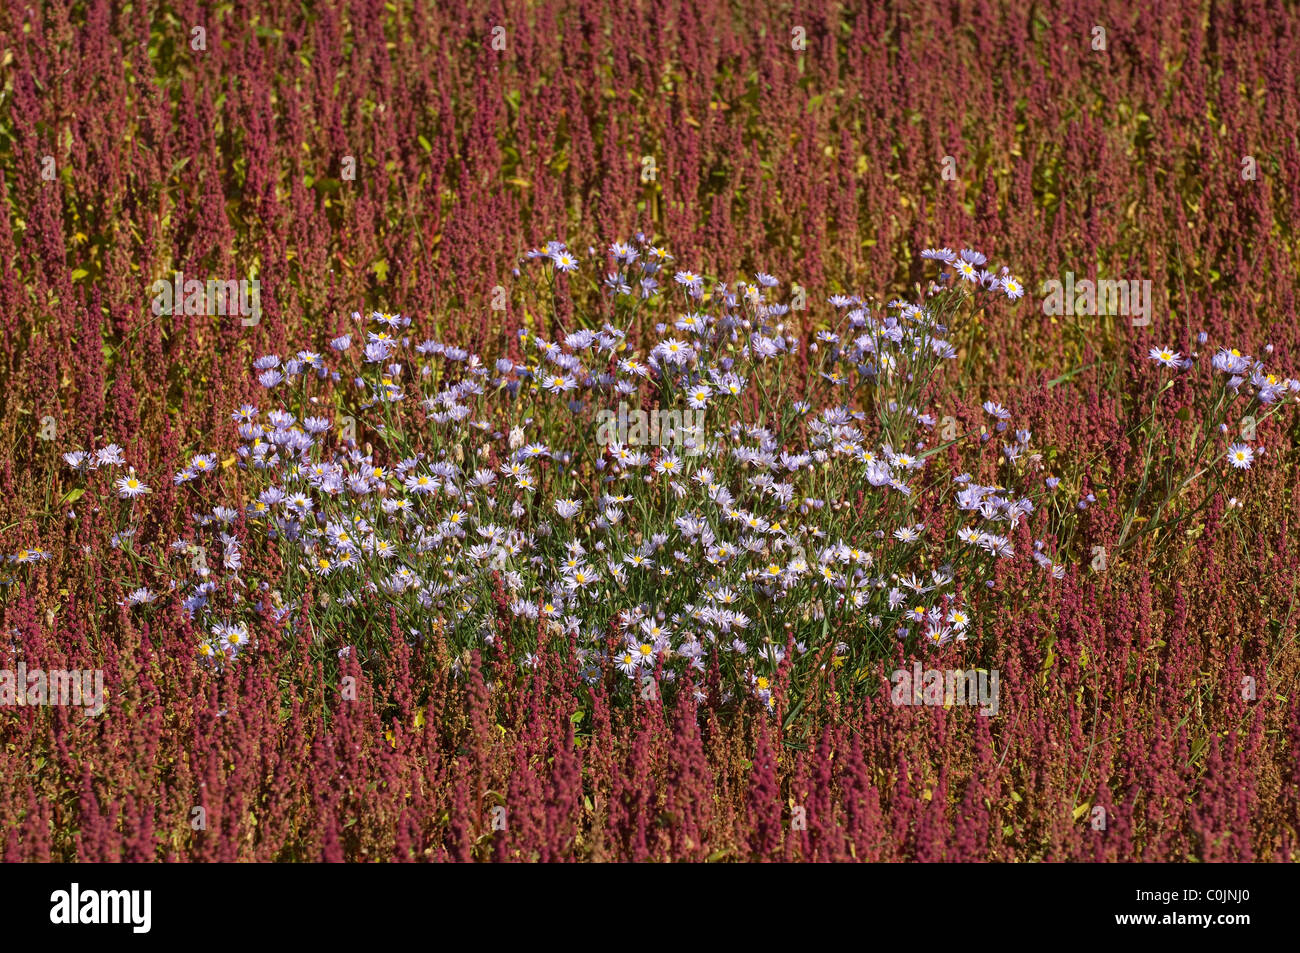 Low Goosefoot (Chenopodium chenopodioides), flowering plants surrounding a patch of Sea Asters (Aster tripolium) Stock Photo